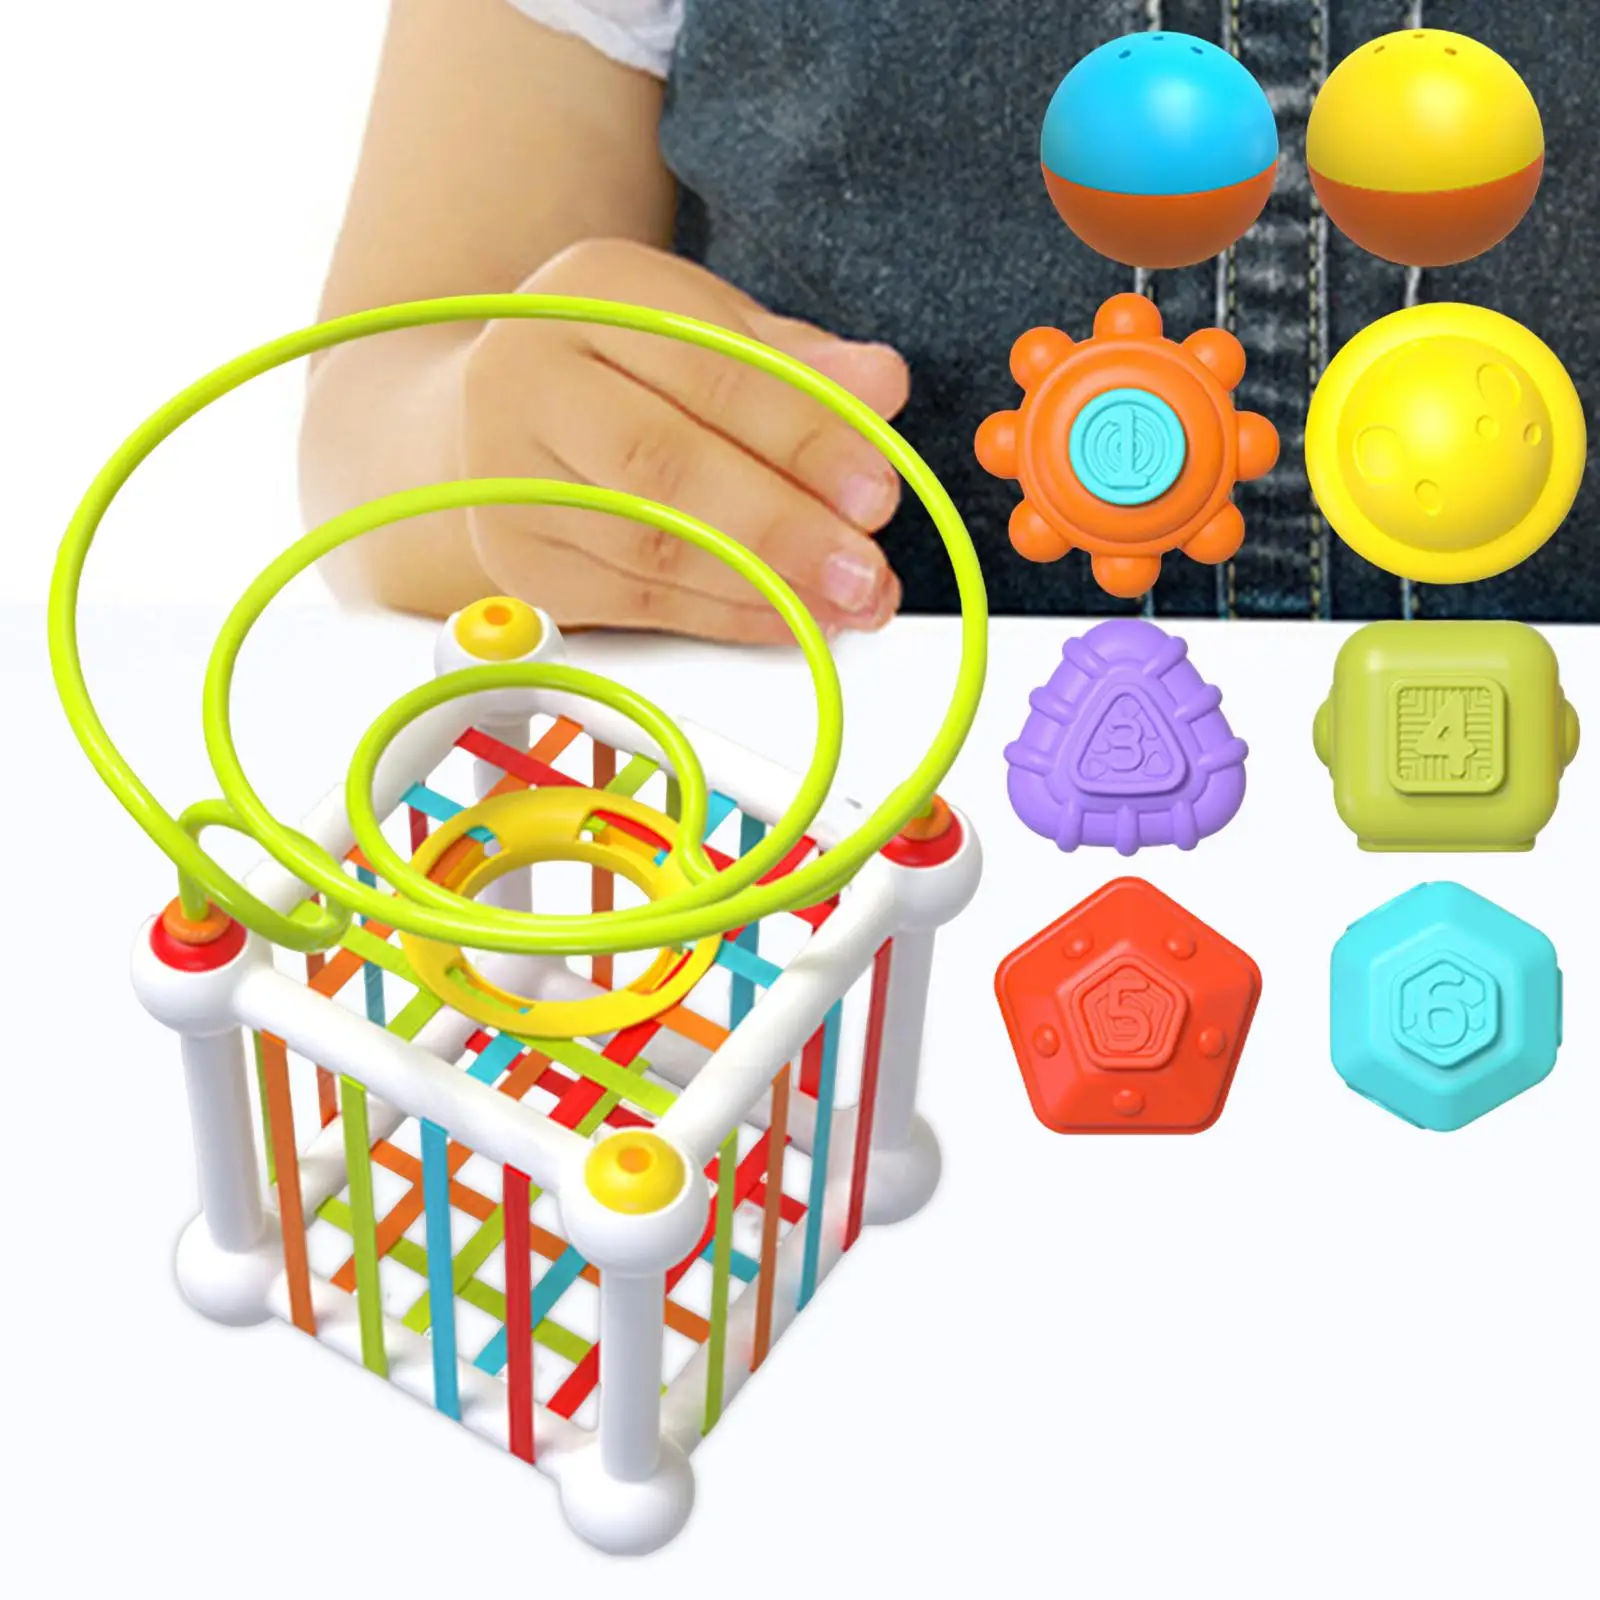 Toddlers Shape Sorter Toys Matching Fine Motor Skills Textured Balls Sorting Games for Sensory Exploration Creativity Activity